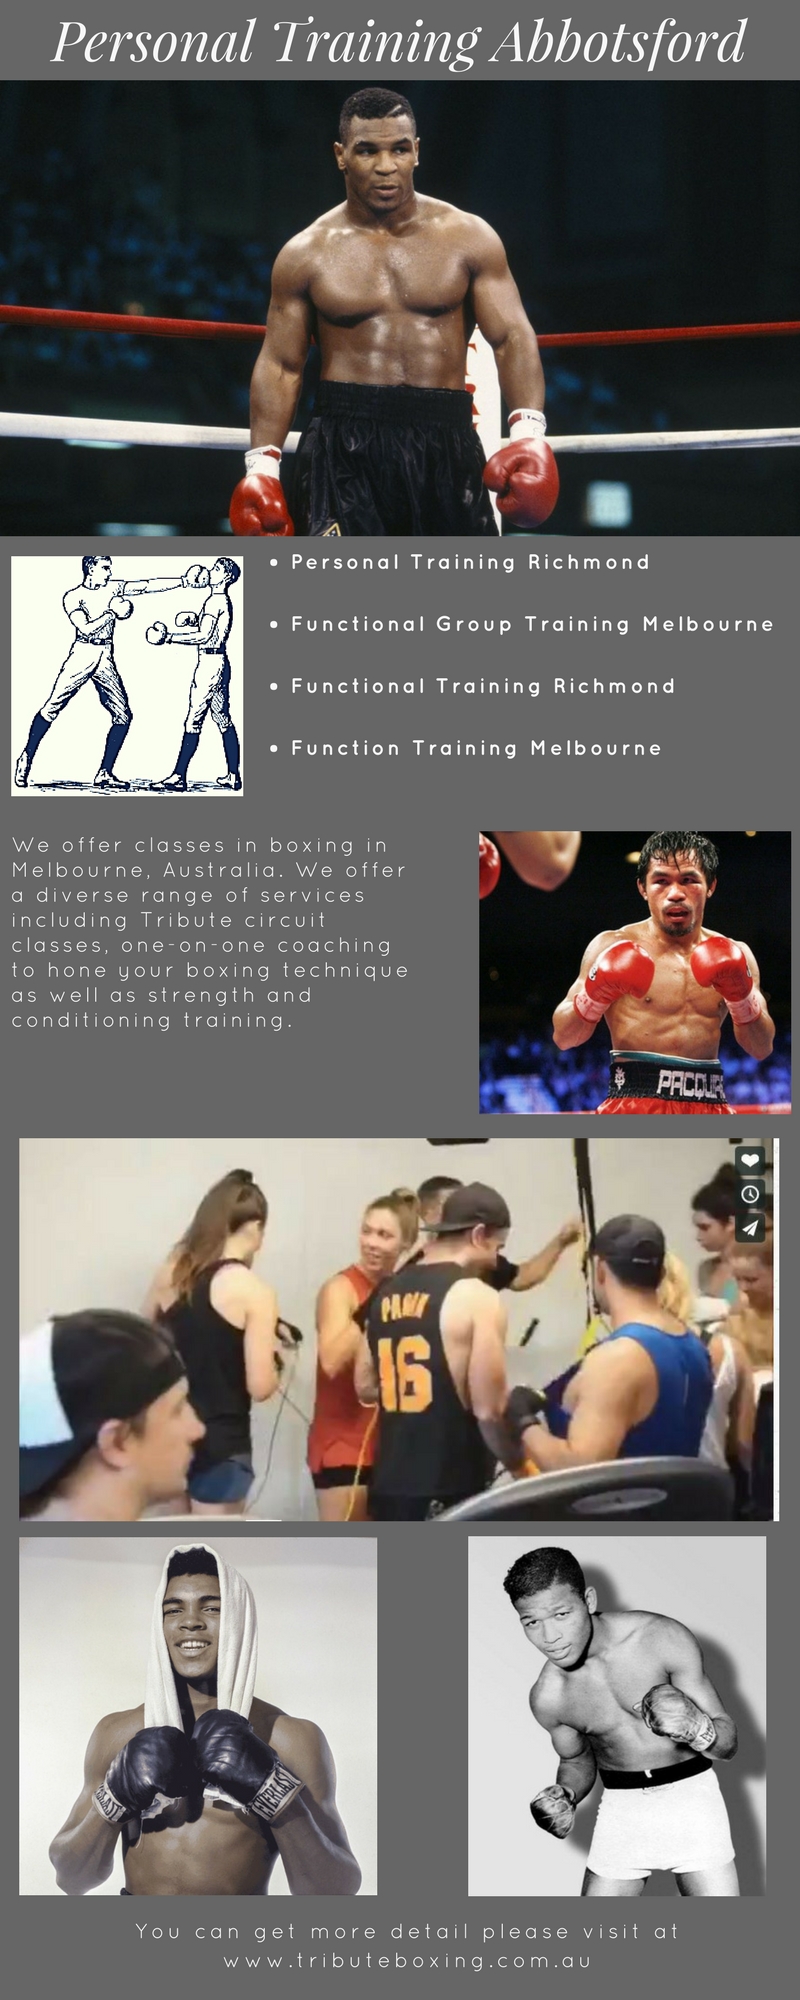 Personal Training Abbotsford Tribute Boxing & Fitness offers personal training in Abbotsford Melbourne, Australia. 
http://www.tributeboxing.com.au
 by TributeBoxing